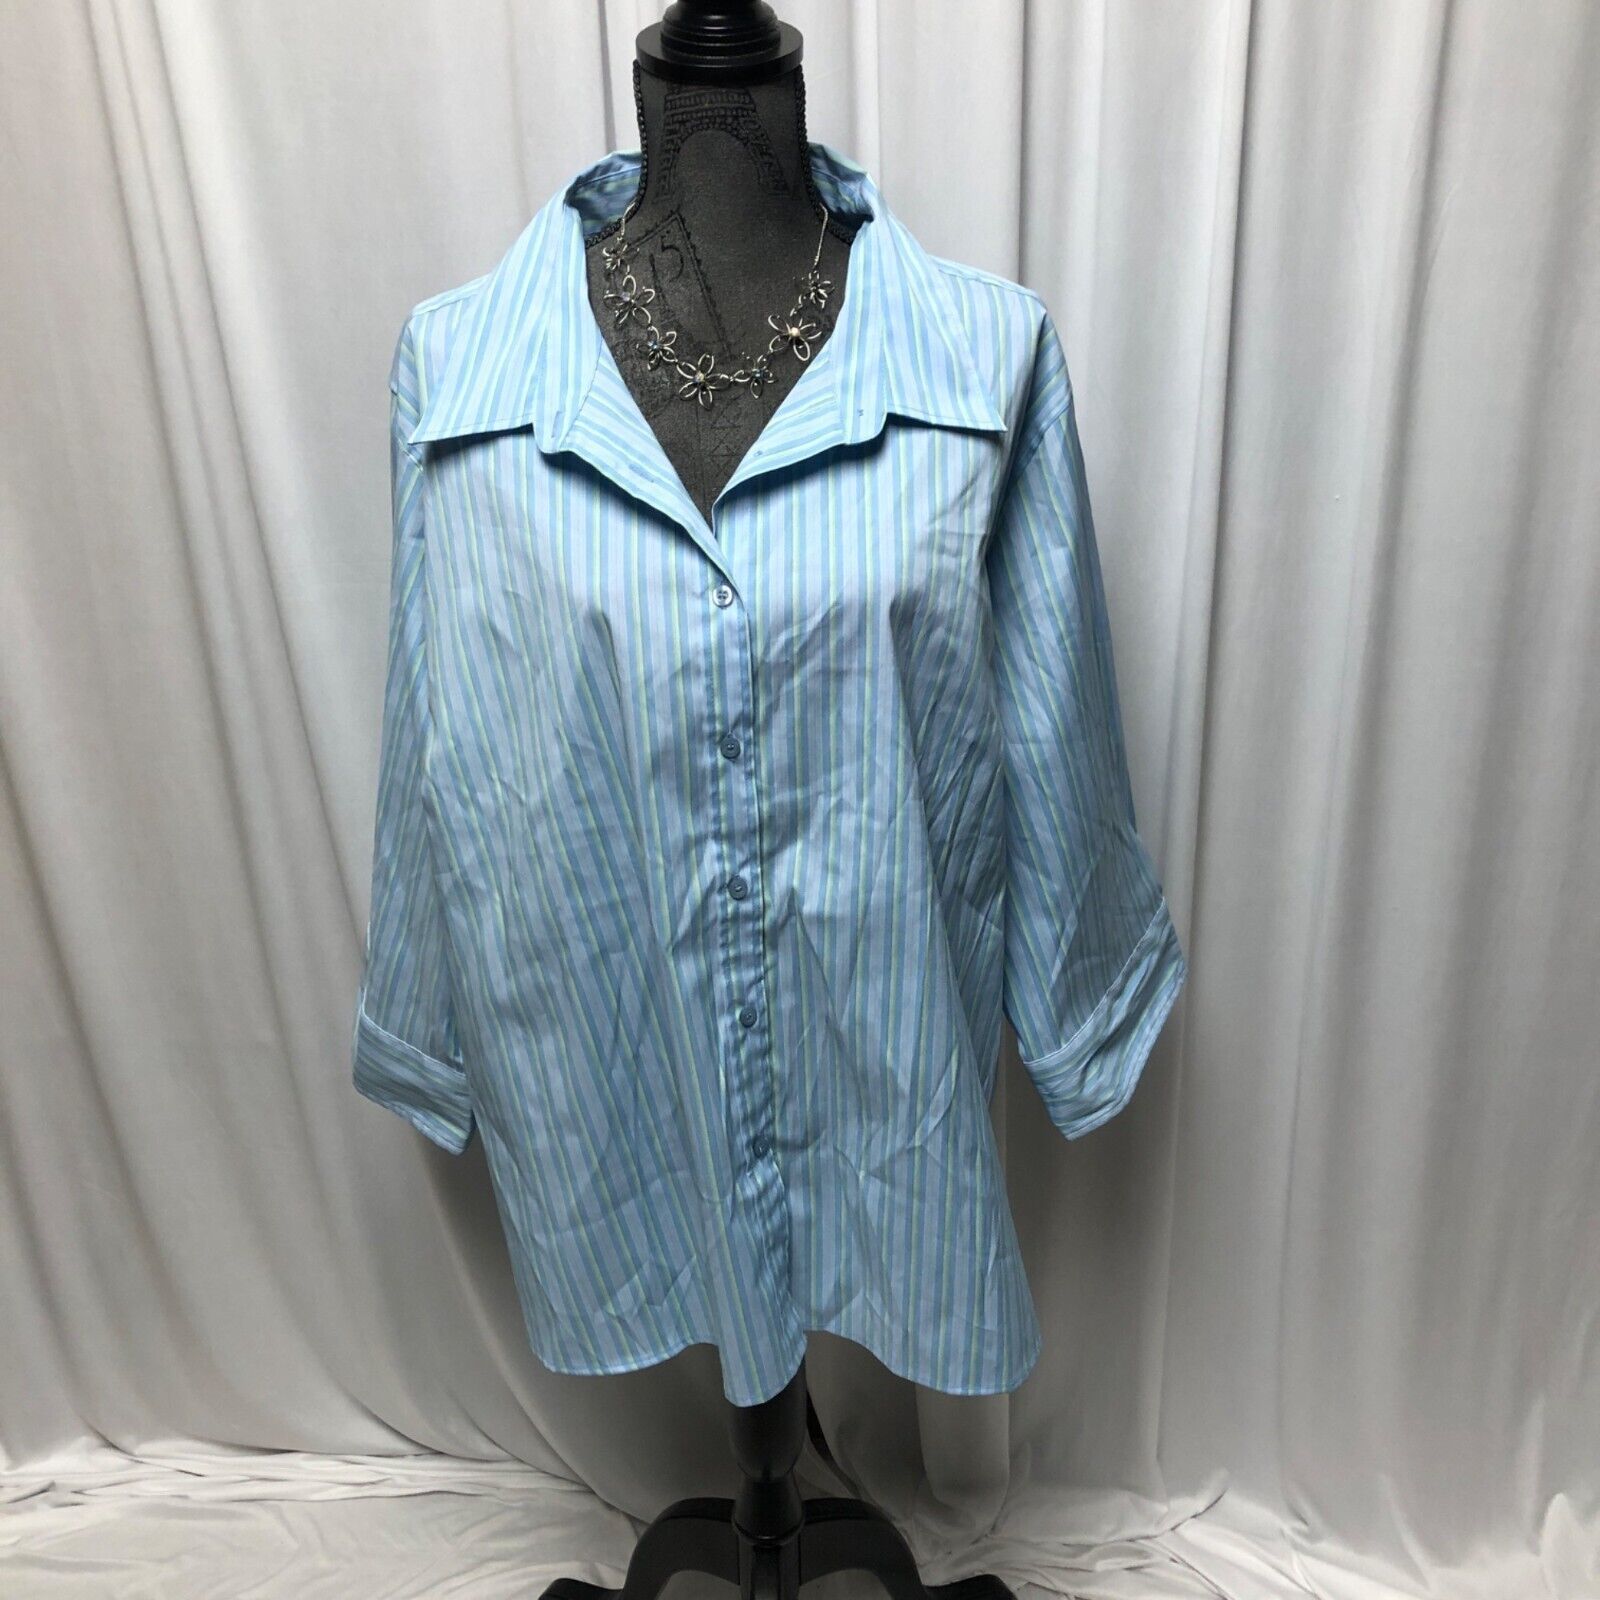 Primary image for DCC Blouse Womens 30-32W Blue Green Button Up Stretch Shirt